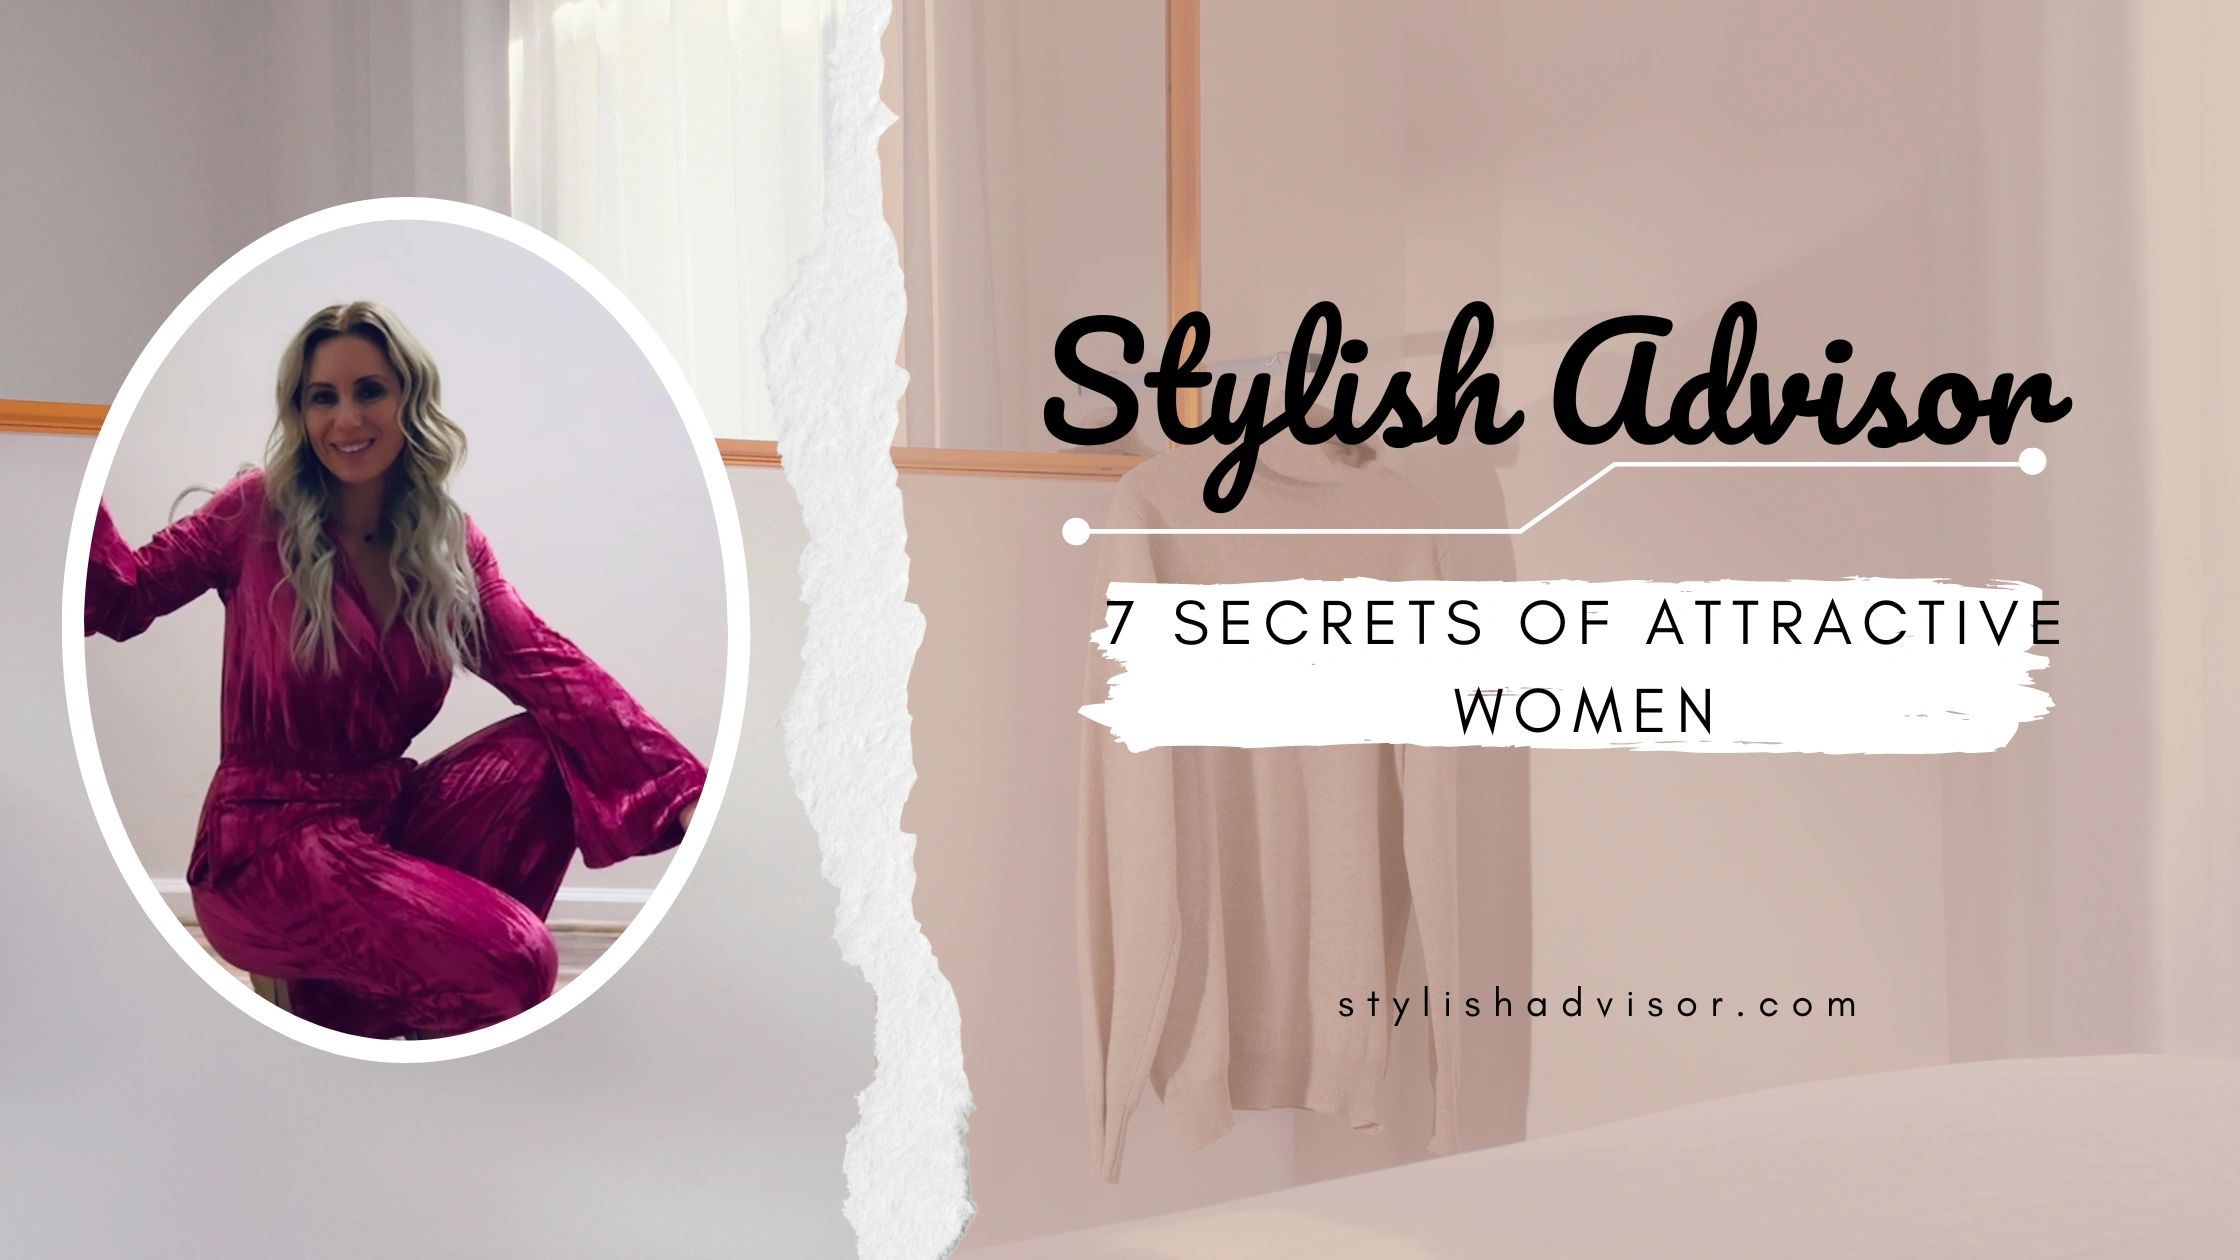 5 Style must haves for Women Over 40 2024